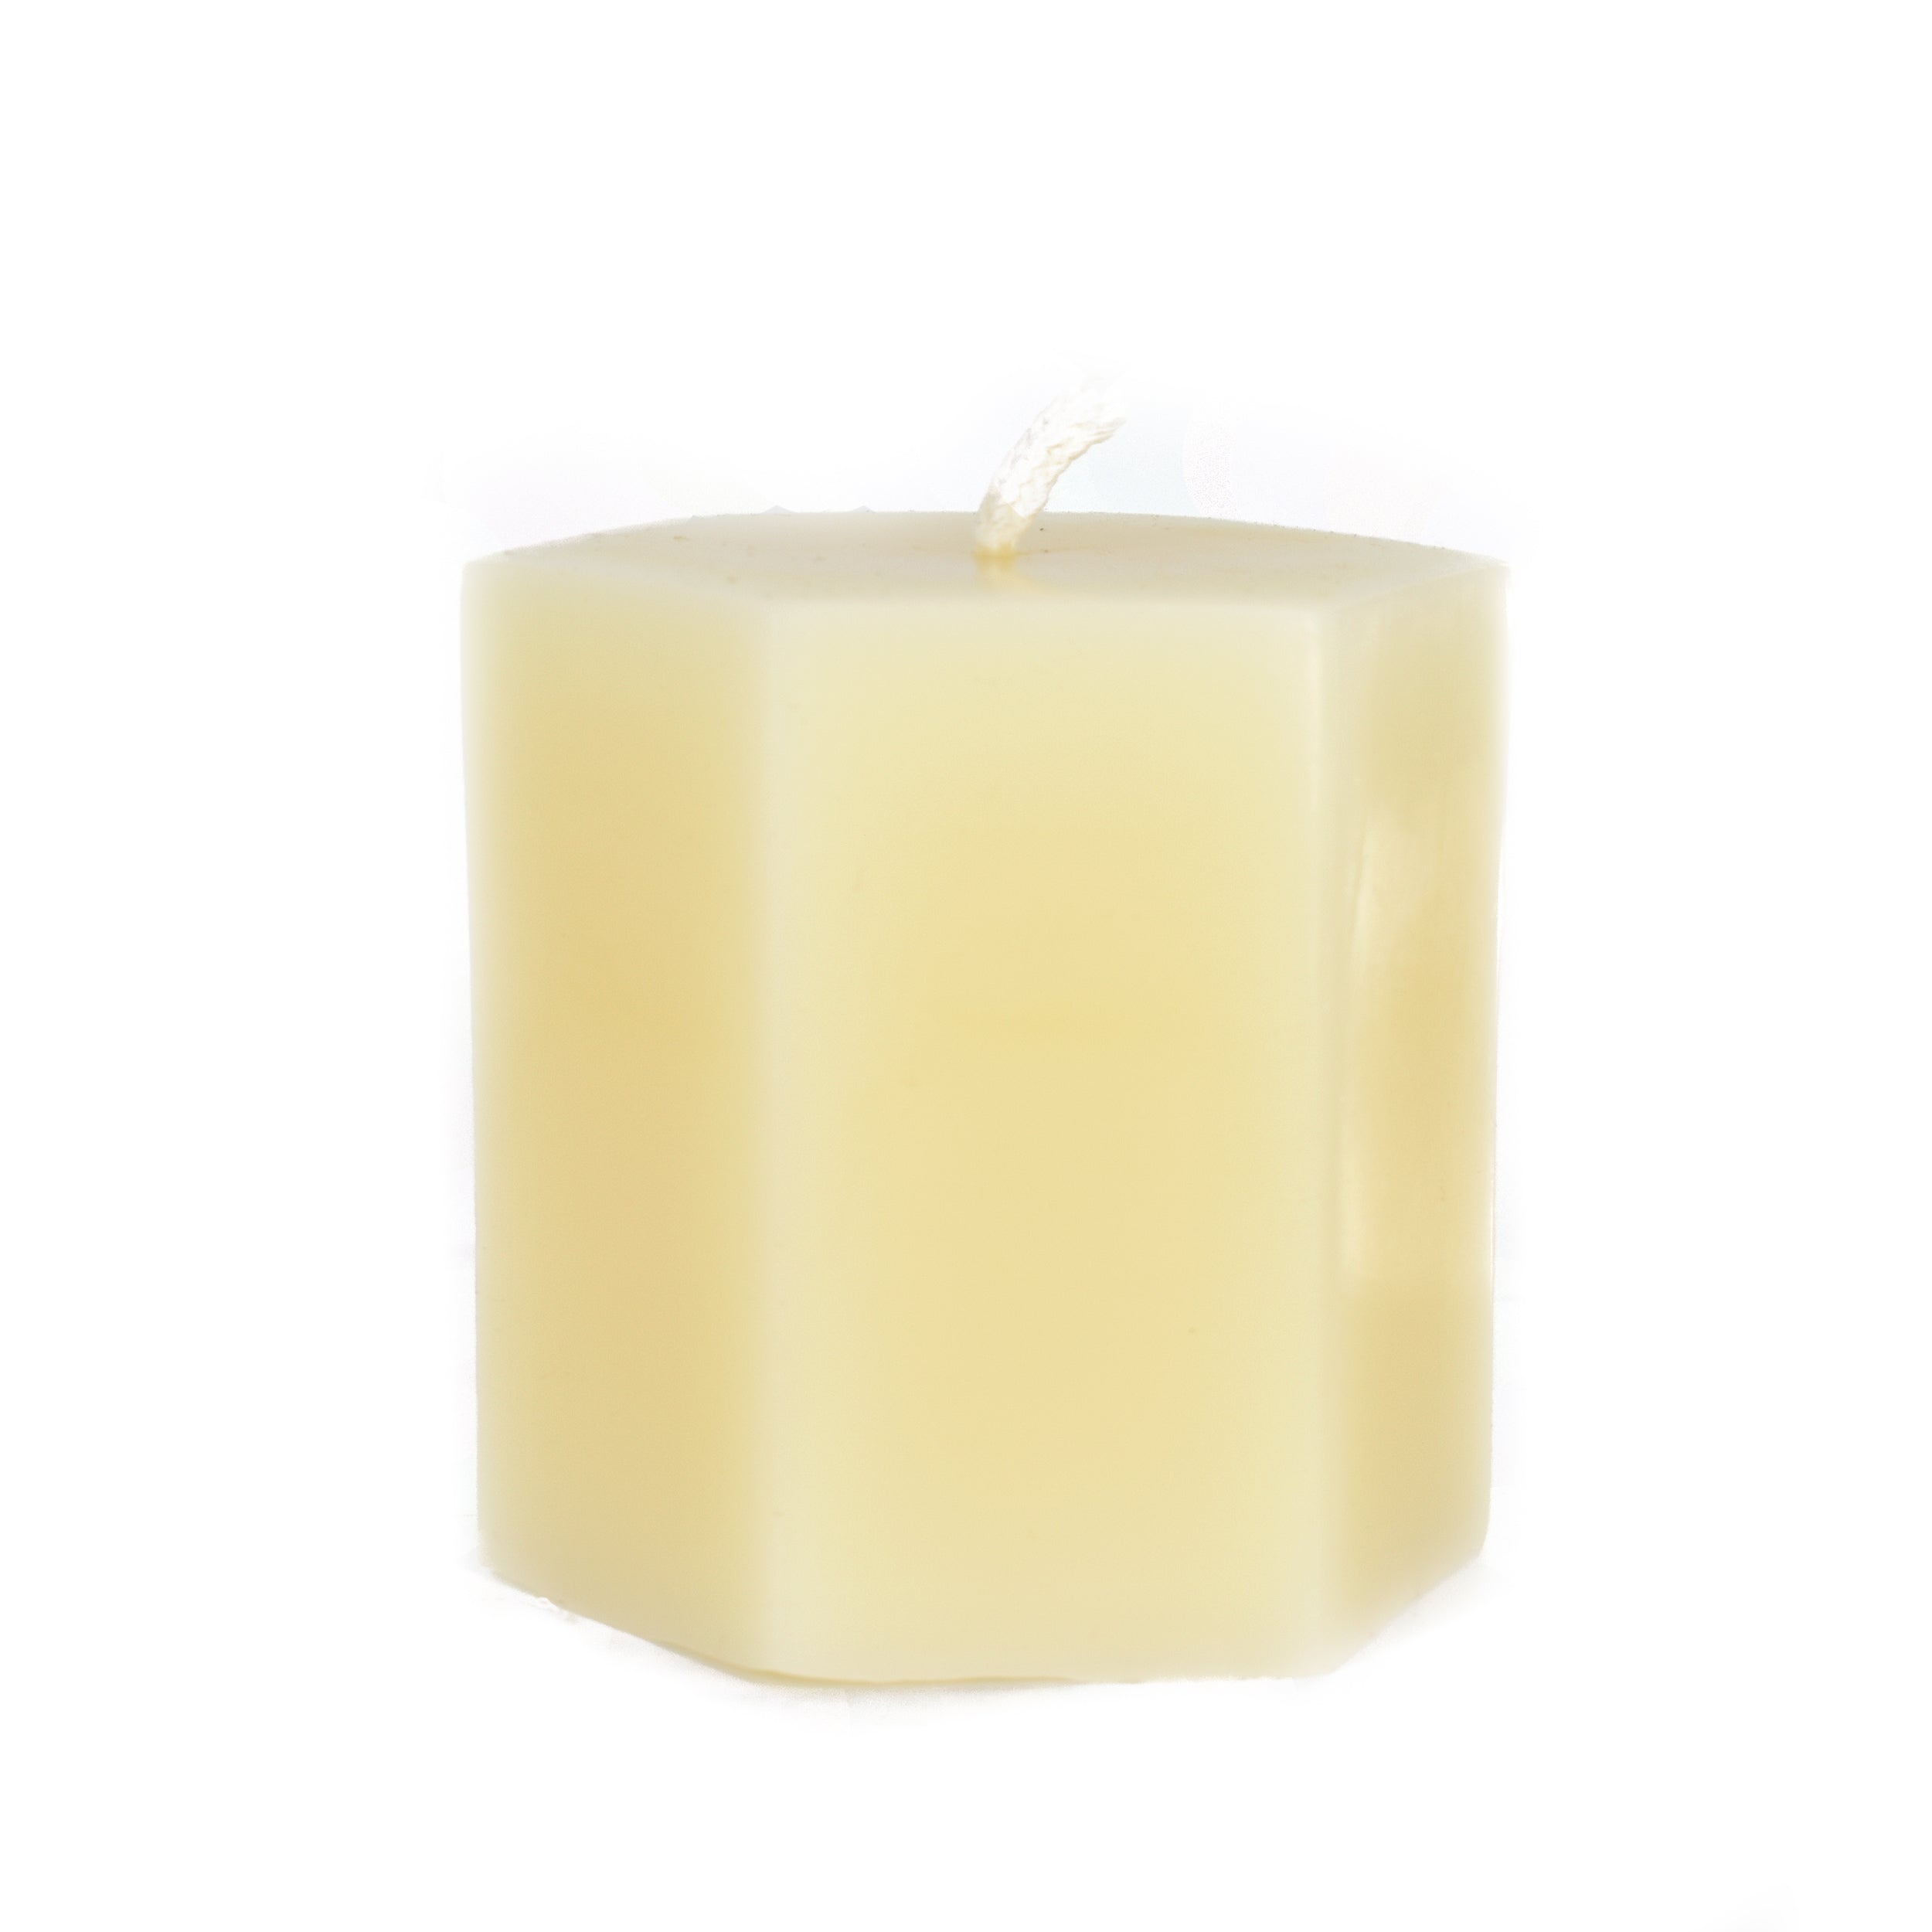 100% Beeswax 3x4 Ivory Hexagon Pillar Candle Save The Bees By Cape Candle